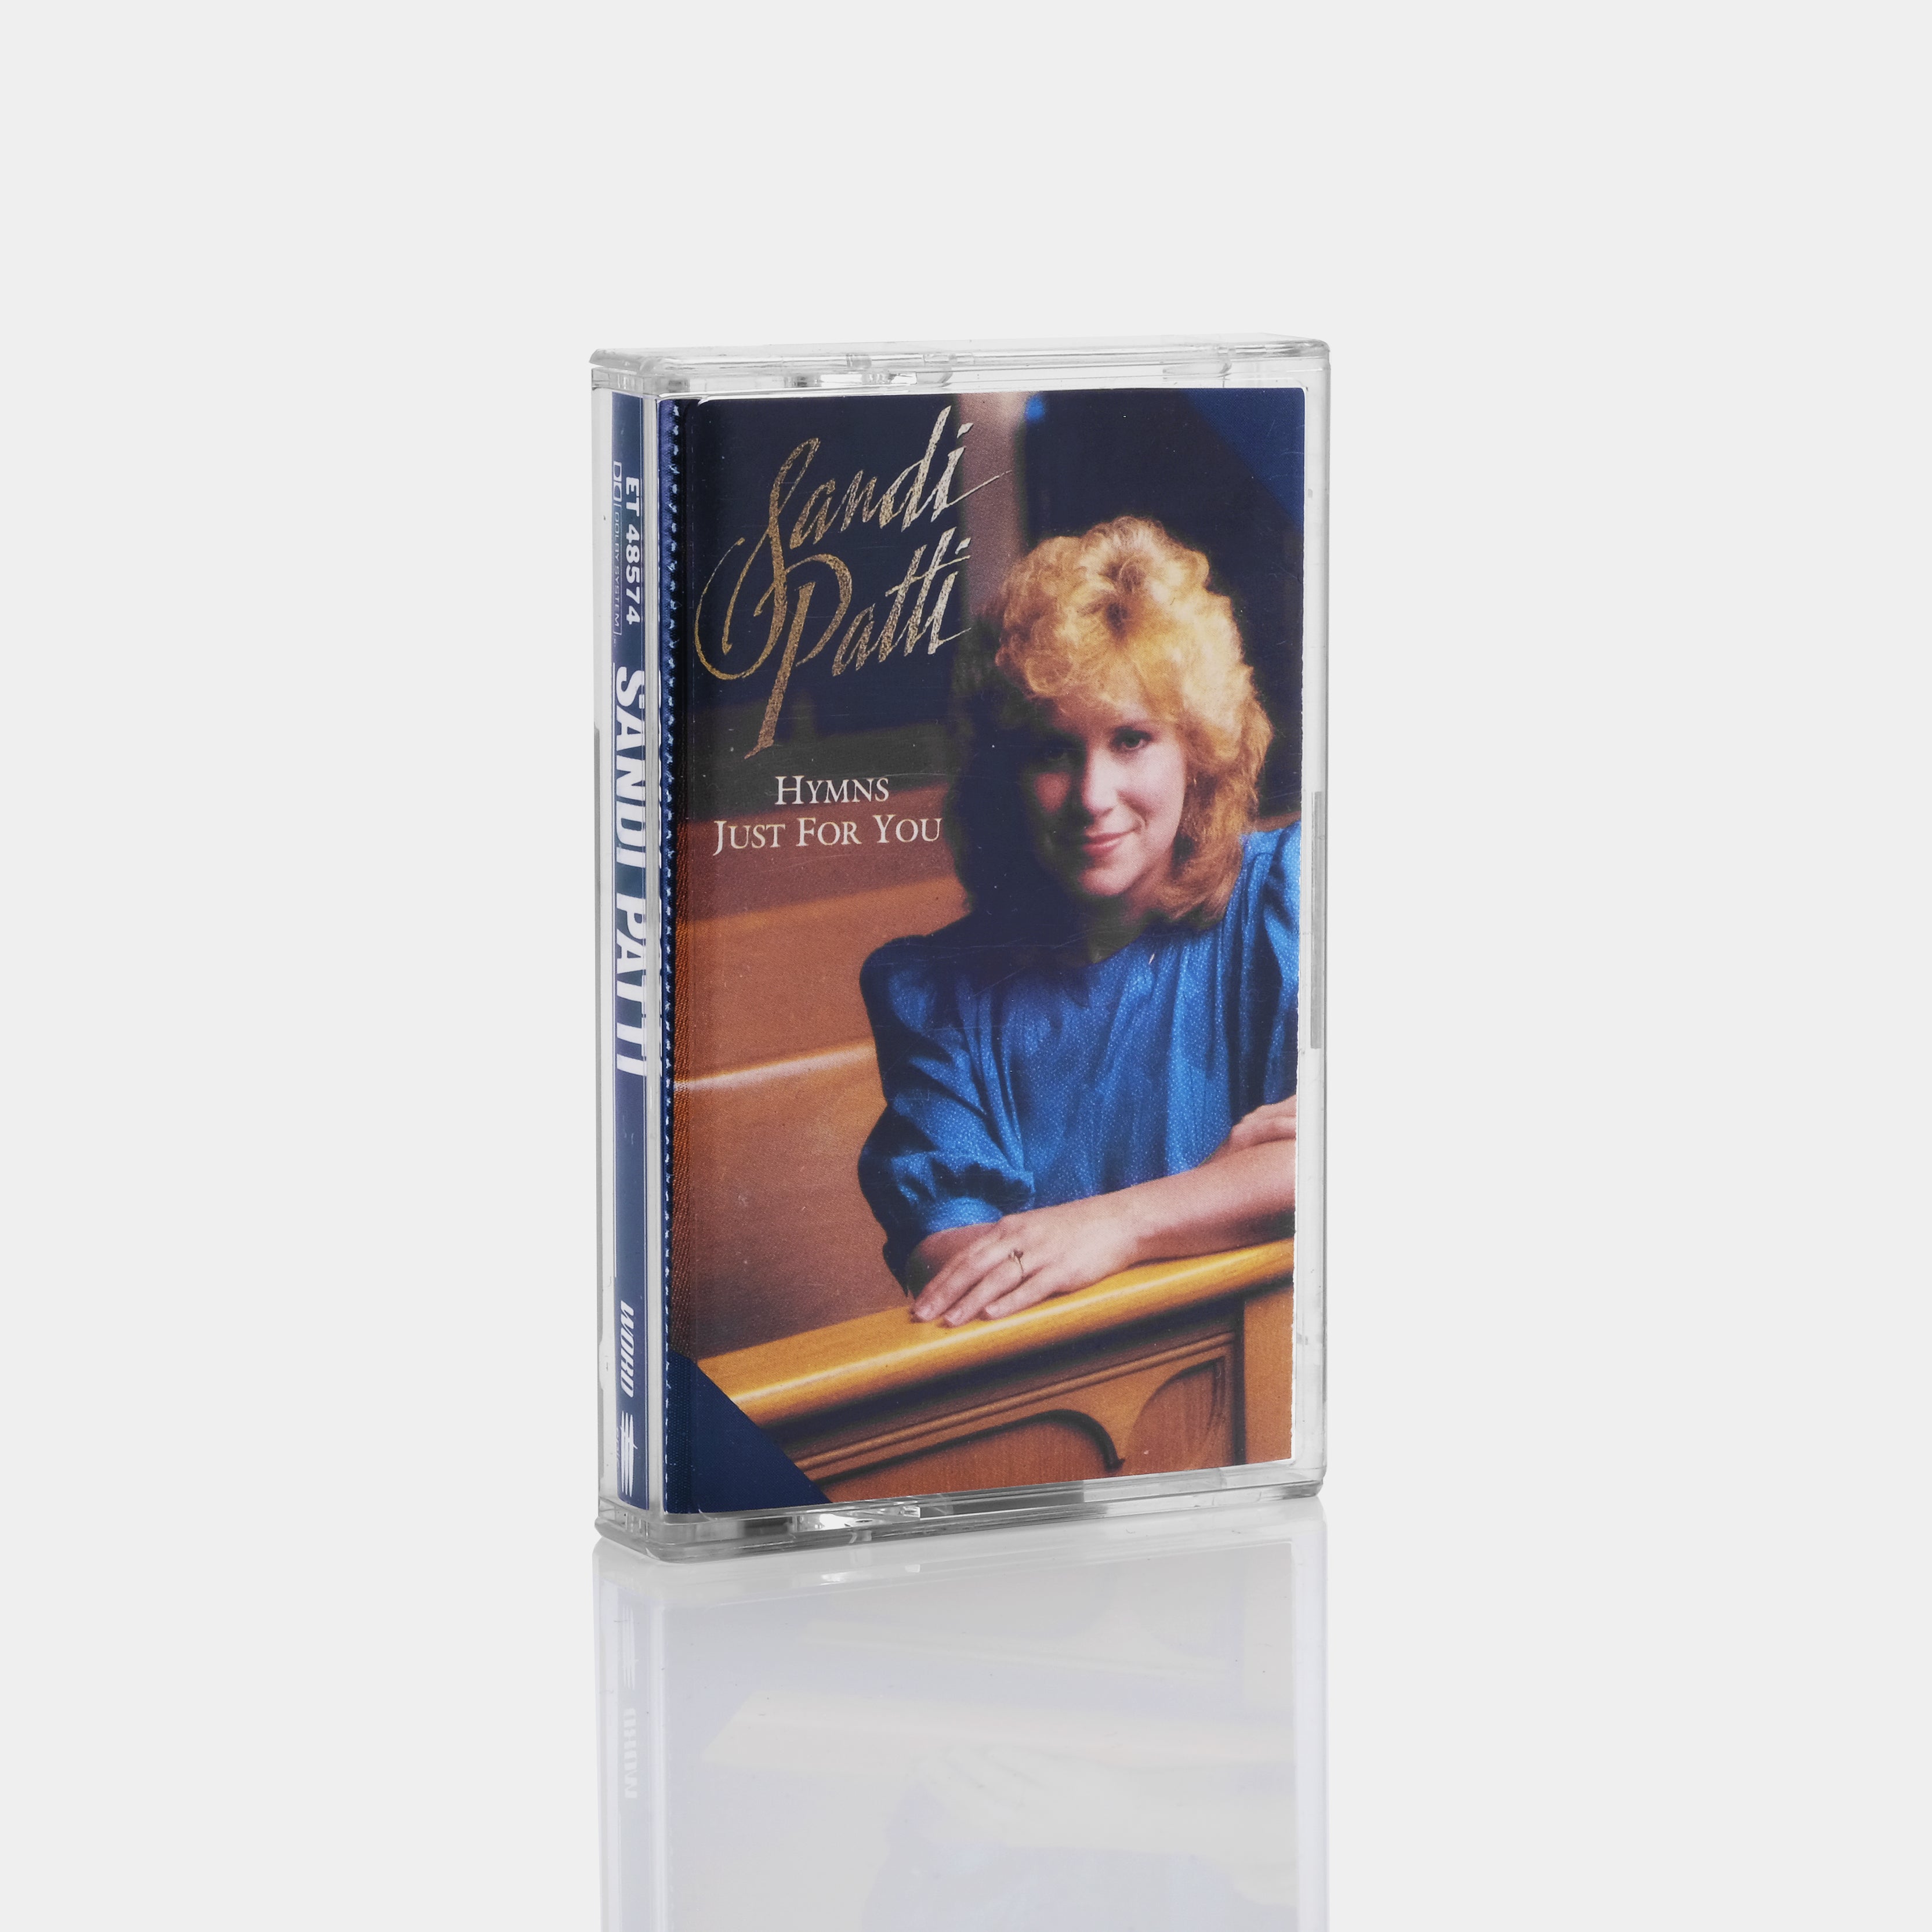 Sandi Patti - Hymns Just For You Cassette Tape